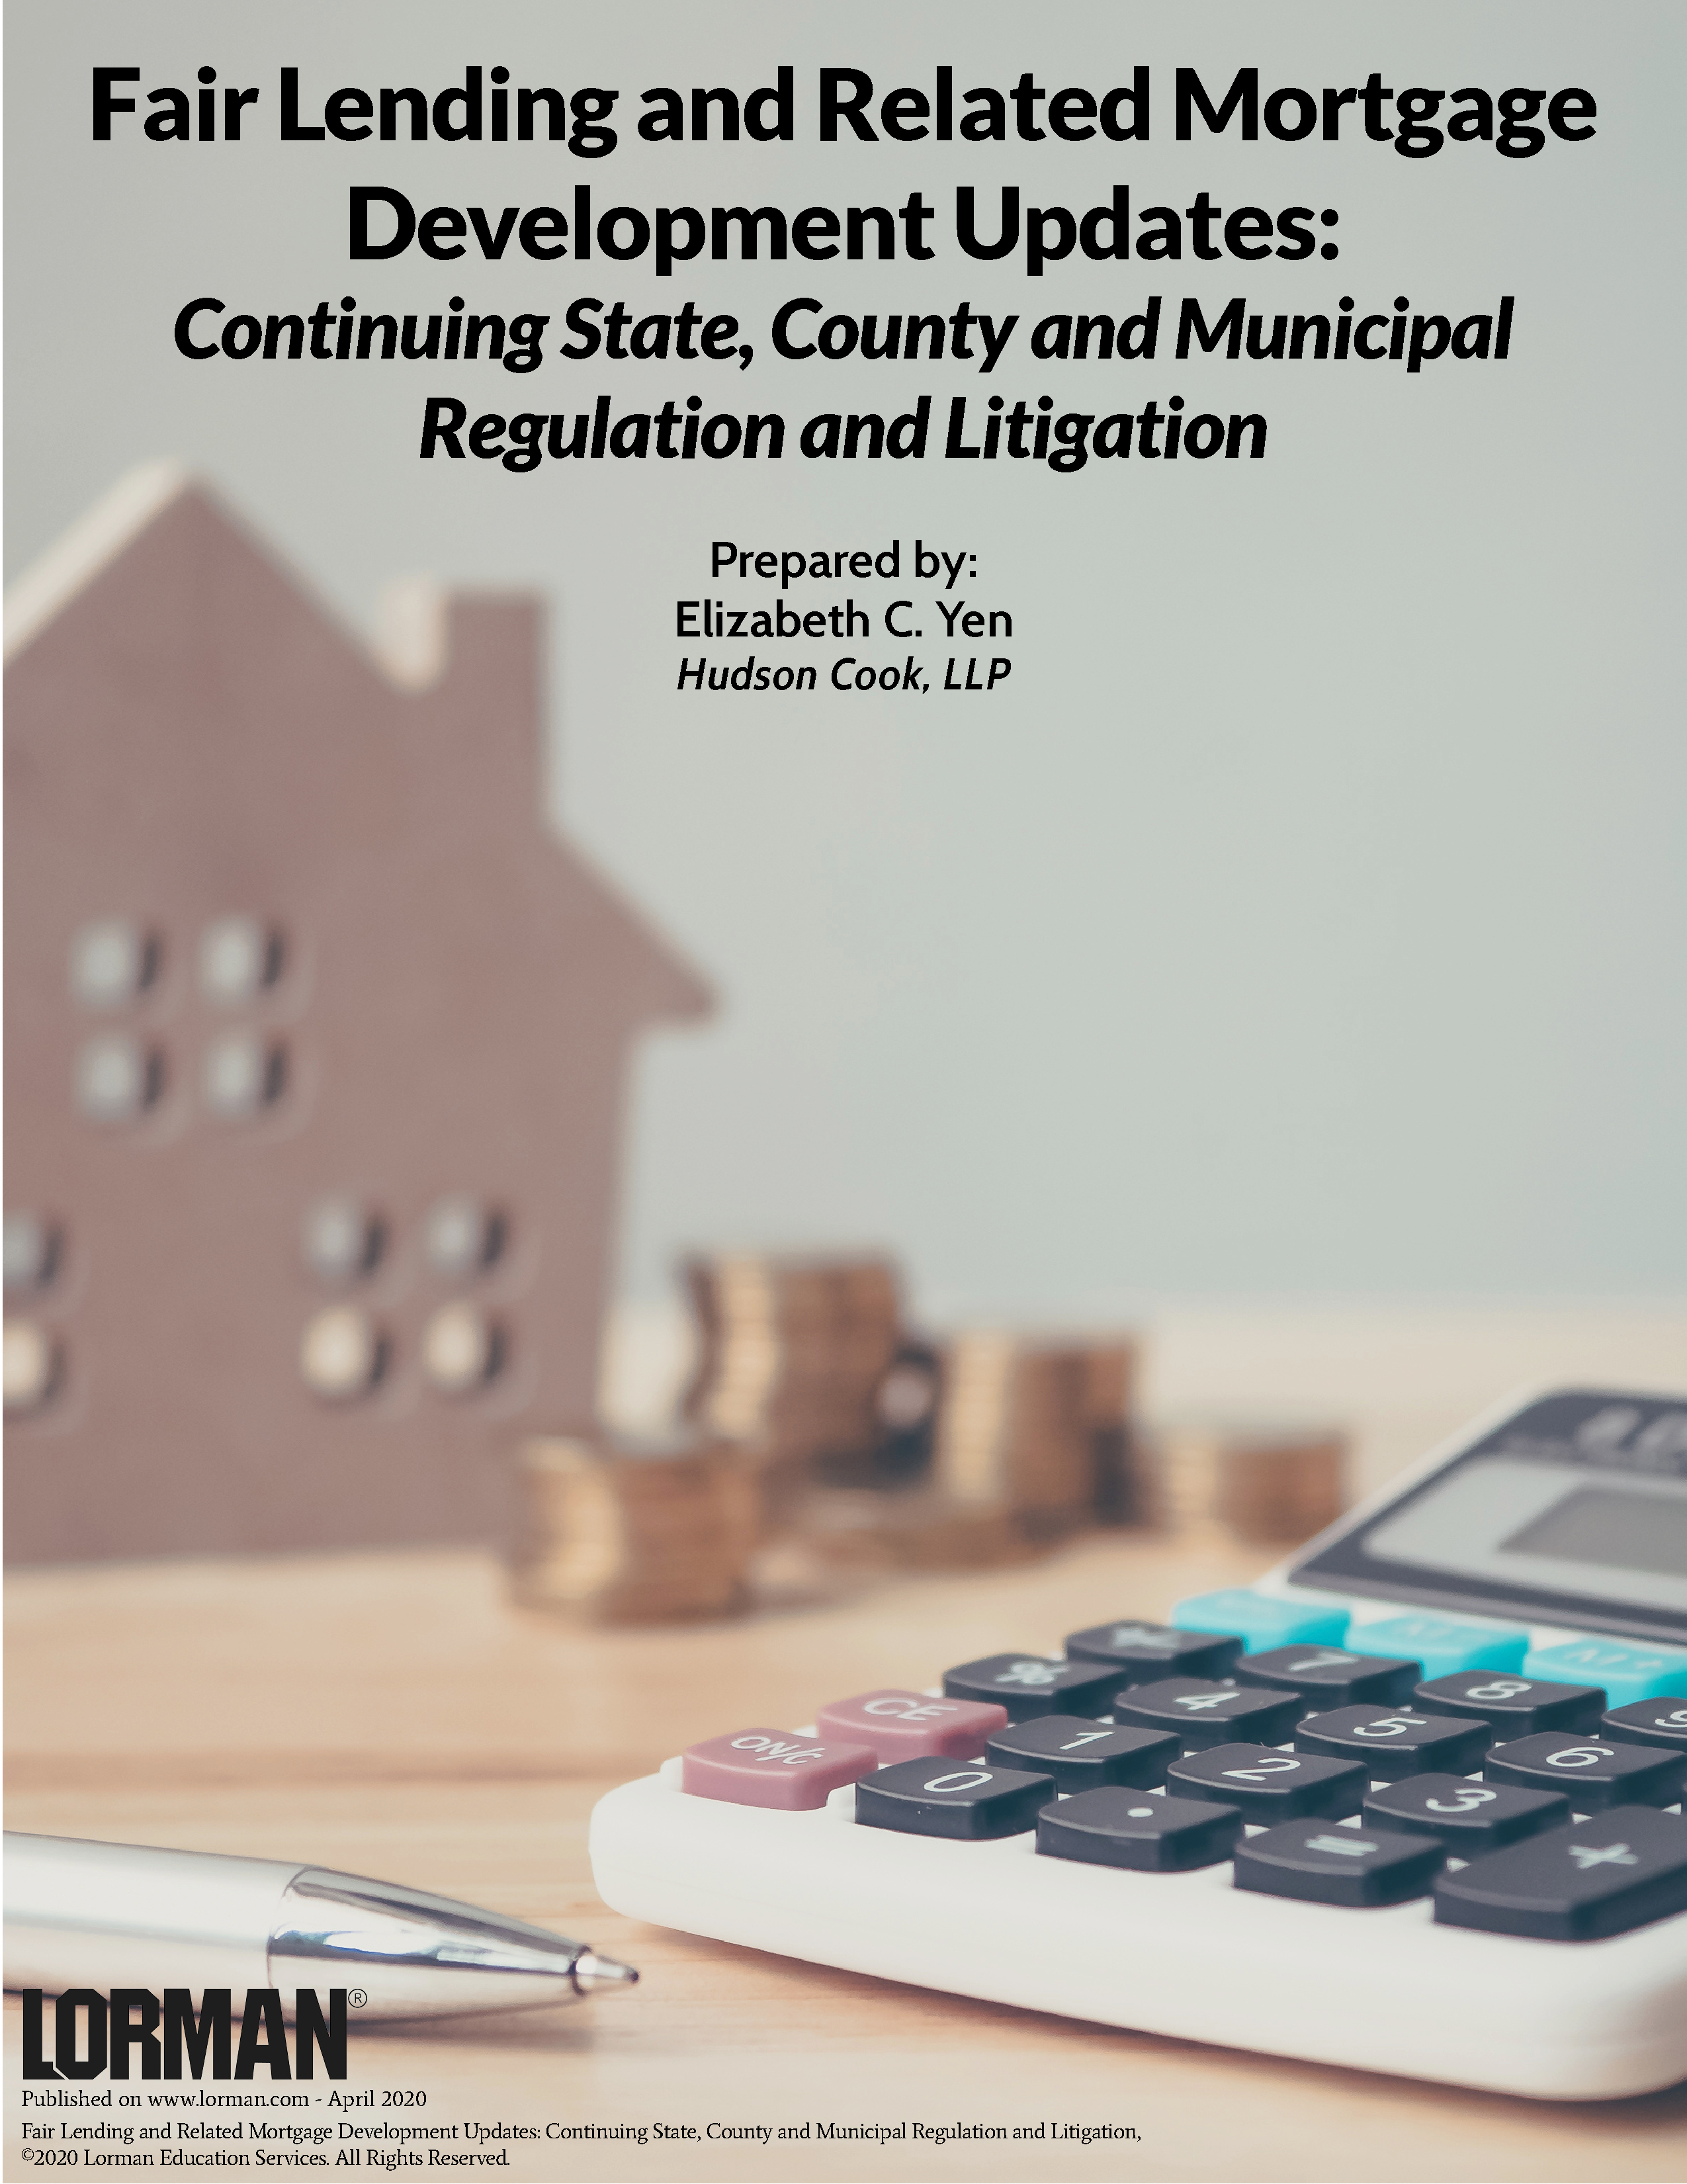 Fair Lending & Mortgage Development Updates: State, County and Municipal Regulation and Litigation